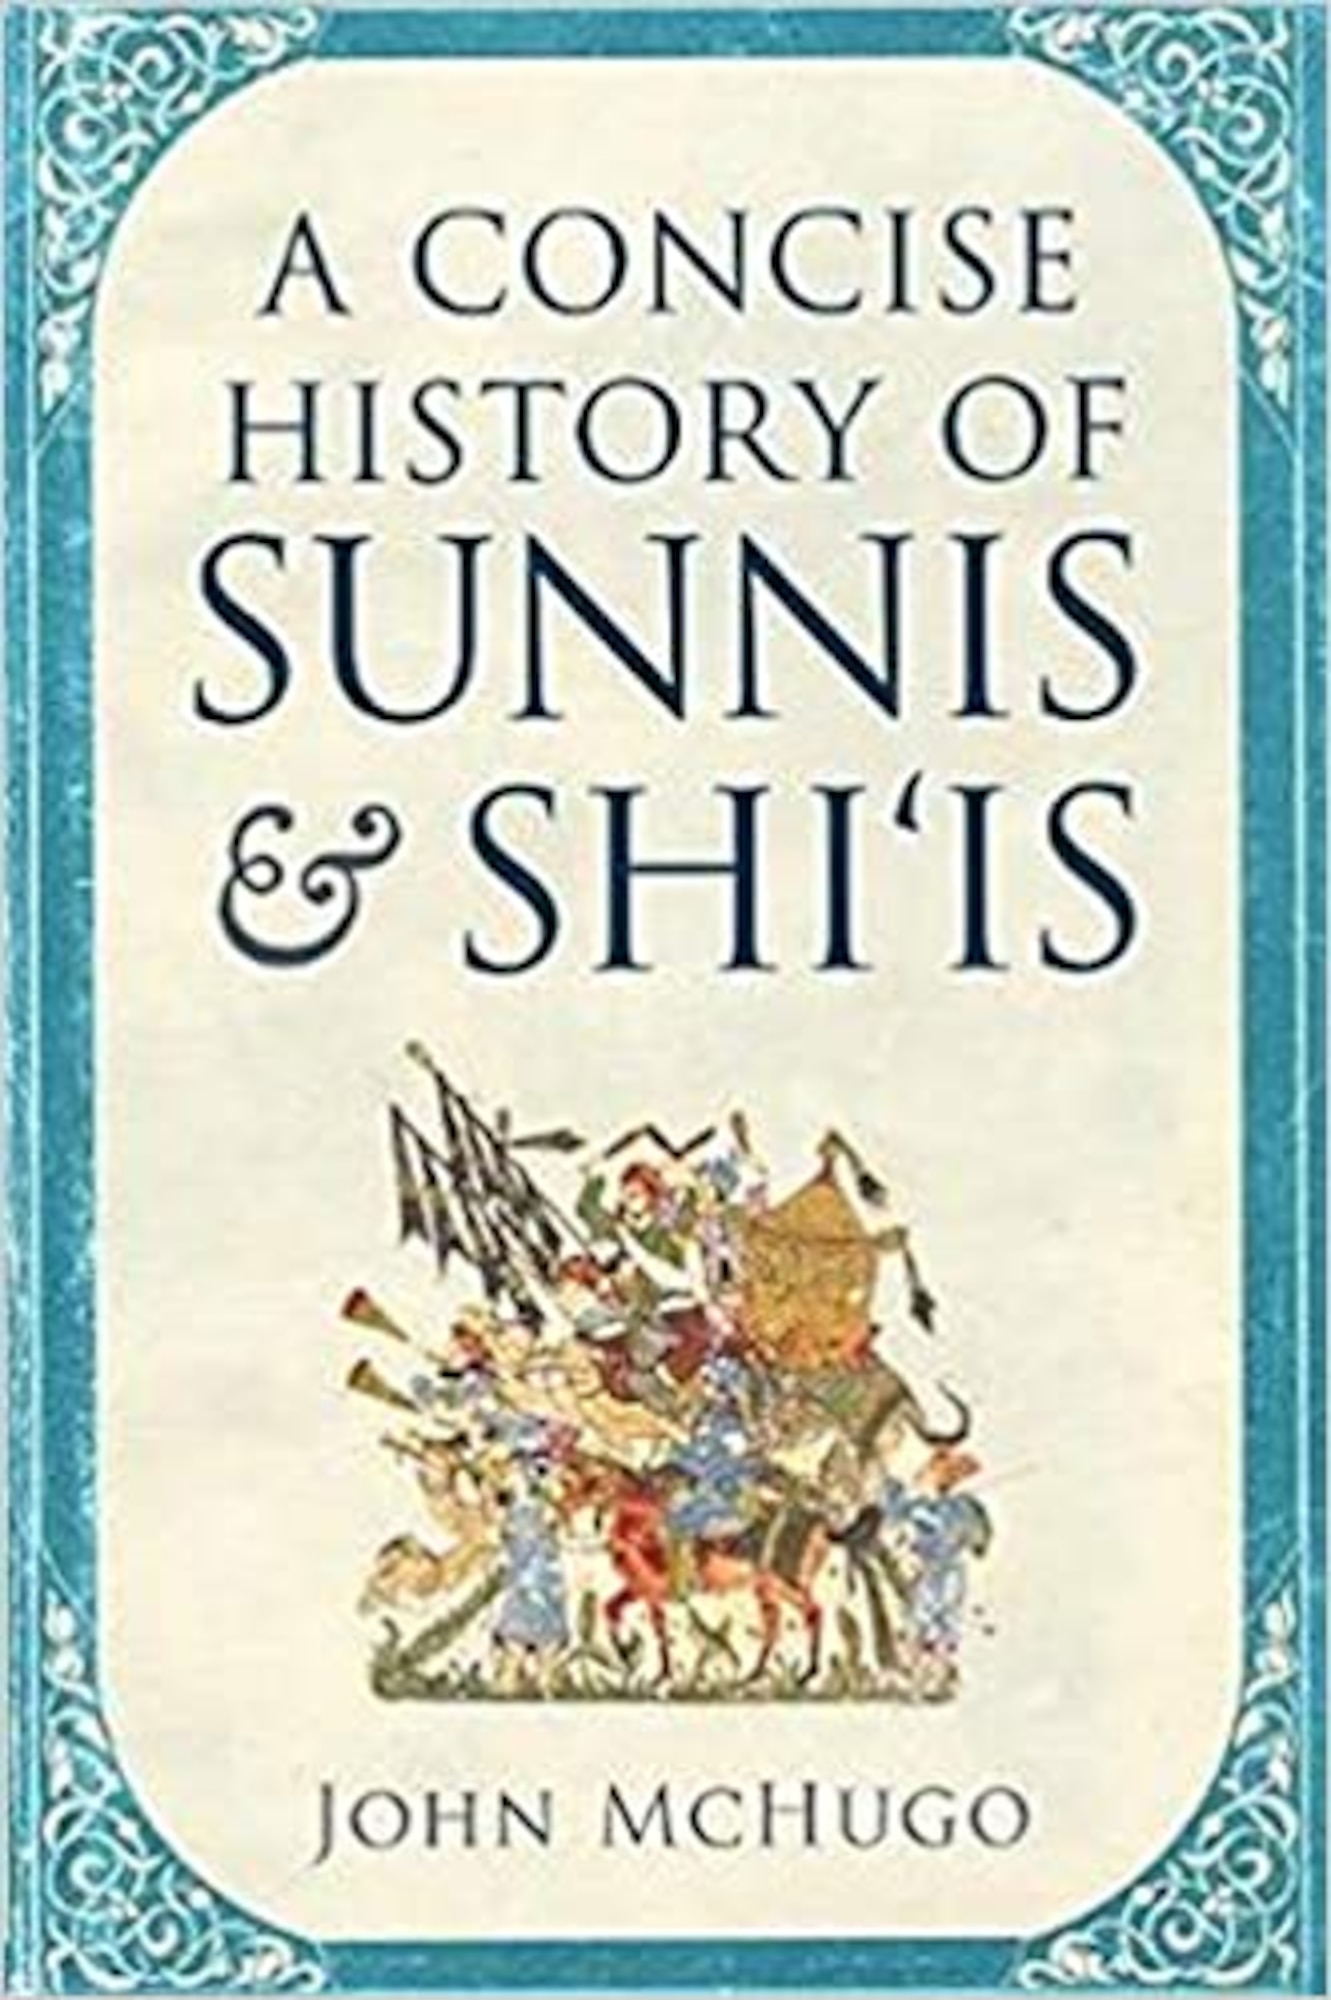 An evaluation of John McHugo’s A Concise History of Sunnis & Shi’is.